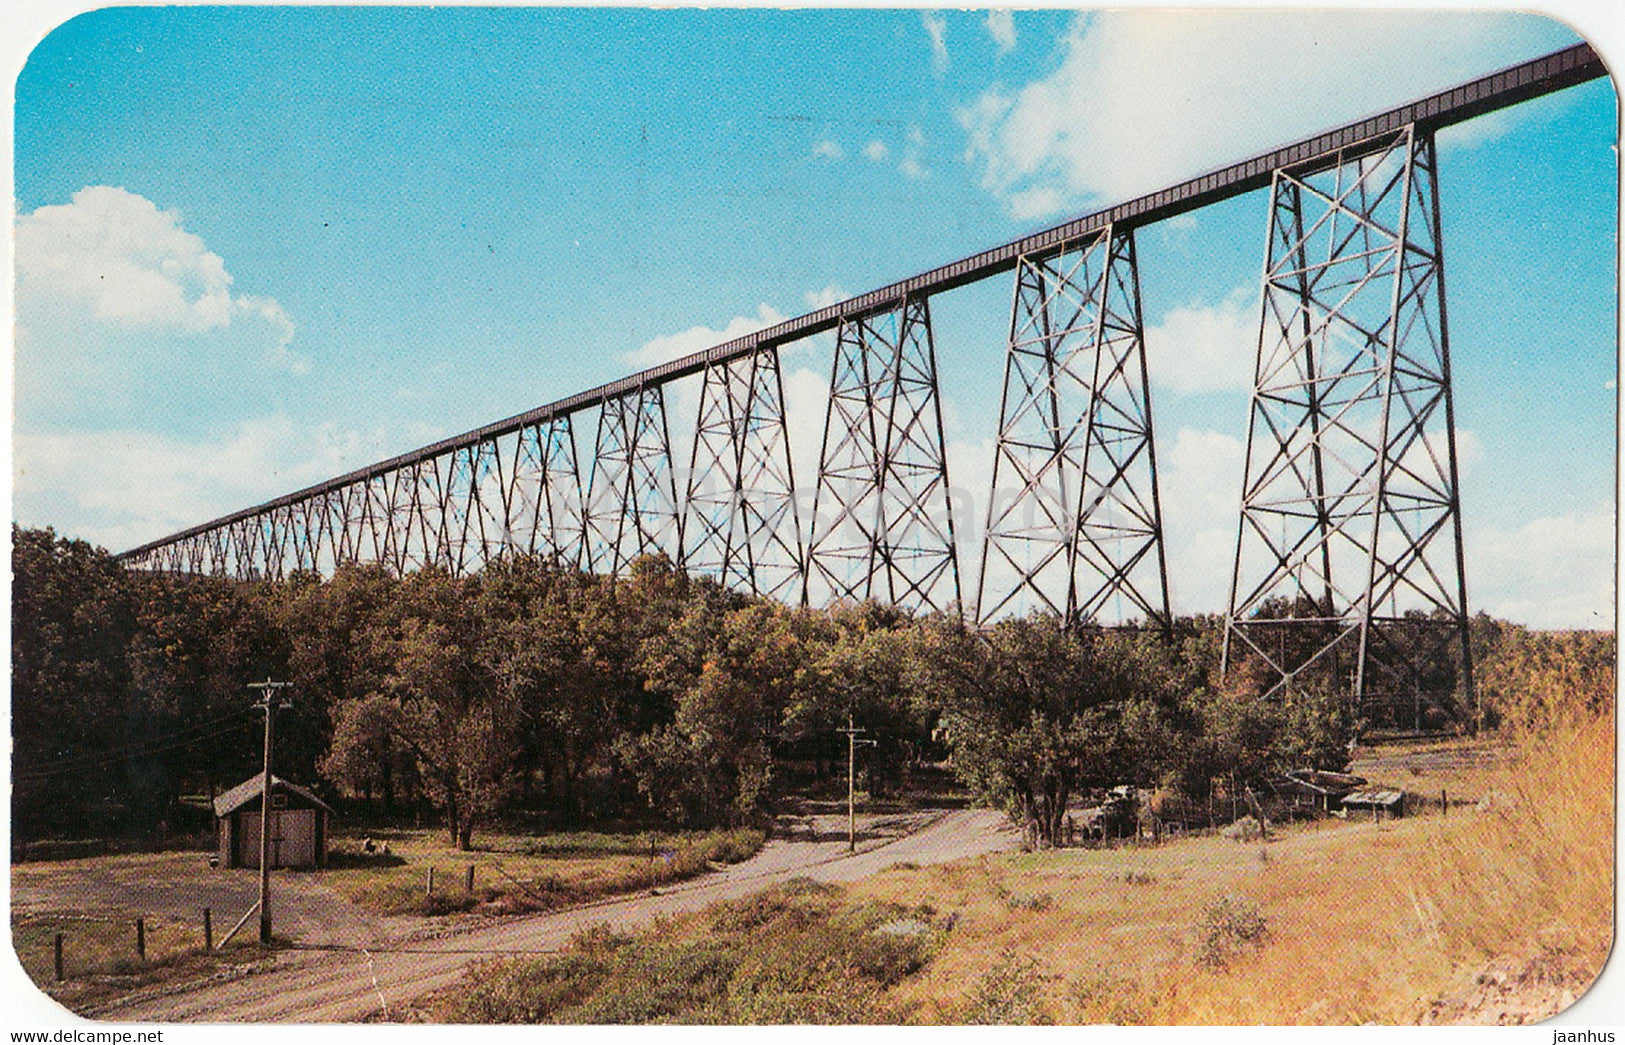 The C P R Railway Bridge on the North Western outskirts at Lethbridge - railway - old postcard - 1954 - Canada - used - JH Postcards